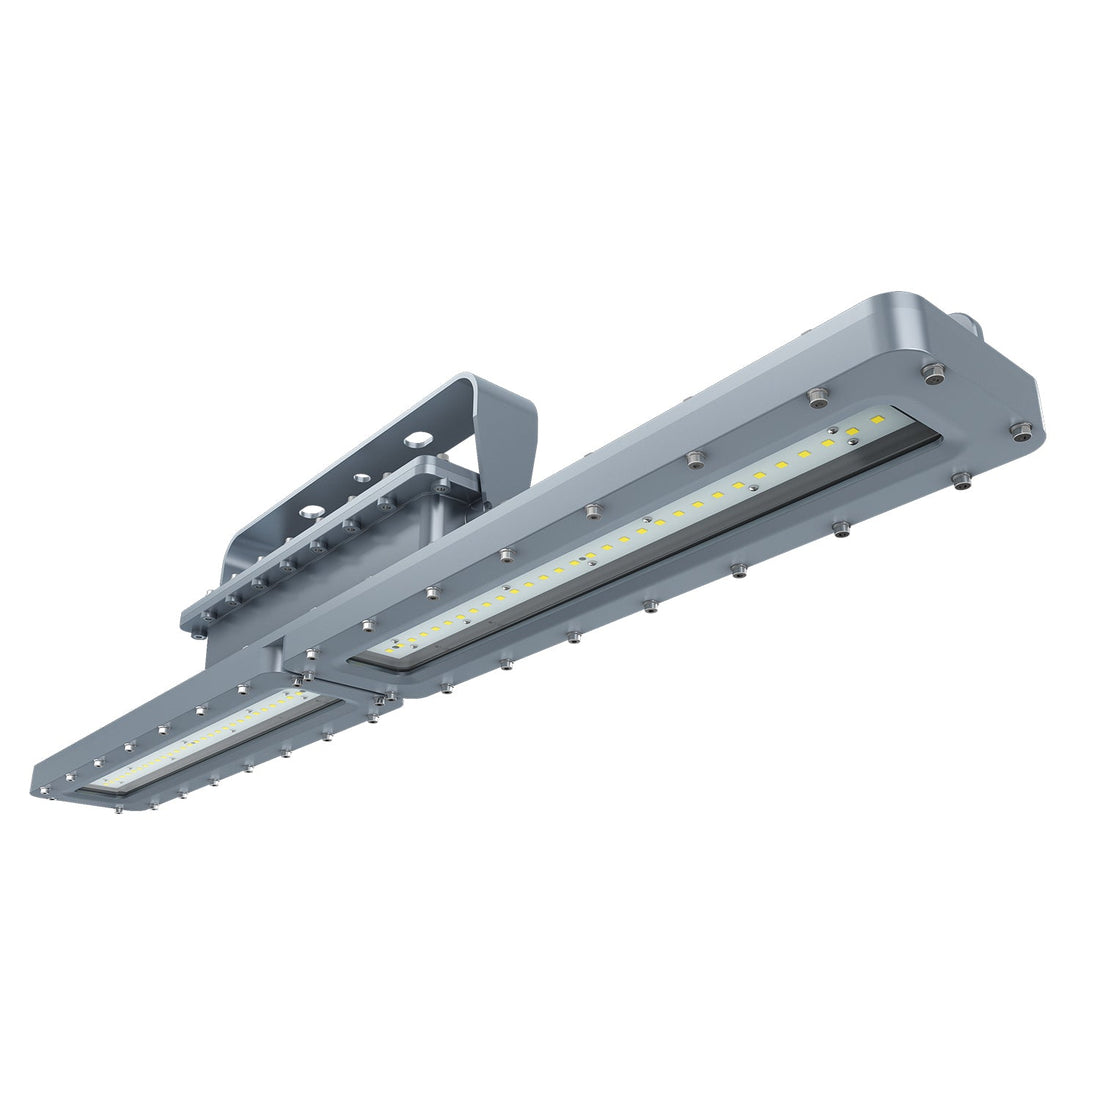 I Series 100W Dimmable LED Explosion Proof Linear Light: High-Brightness Lighting Solution for Hazardous Locations with 14000LM and IP66 Protection, Ideal for Industrial Environments